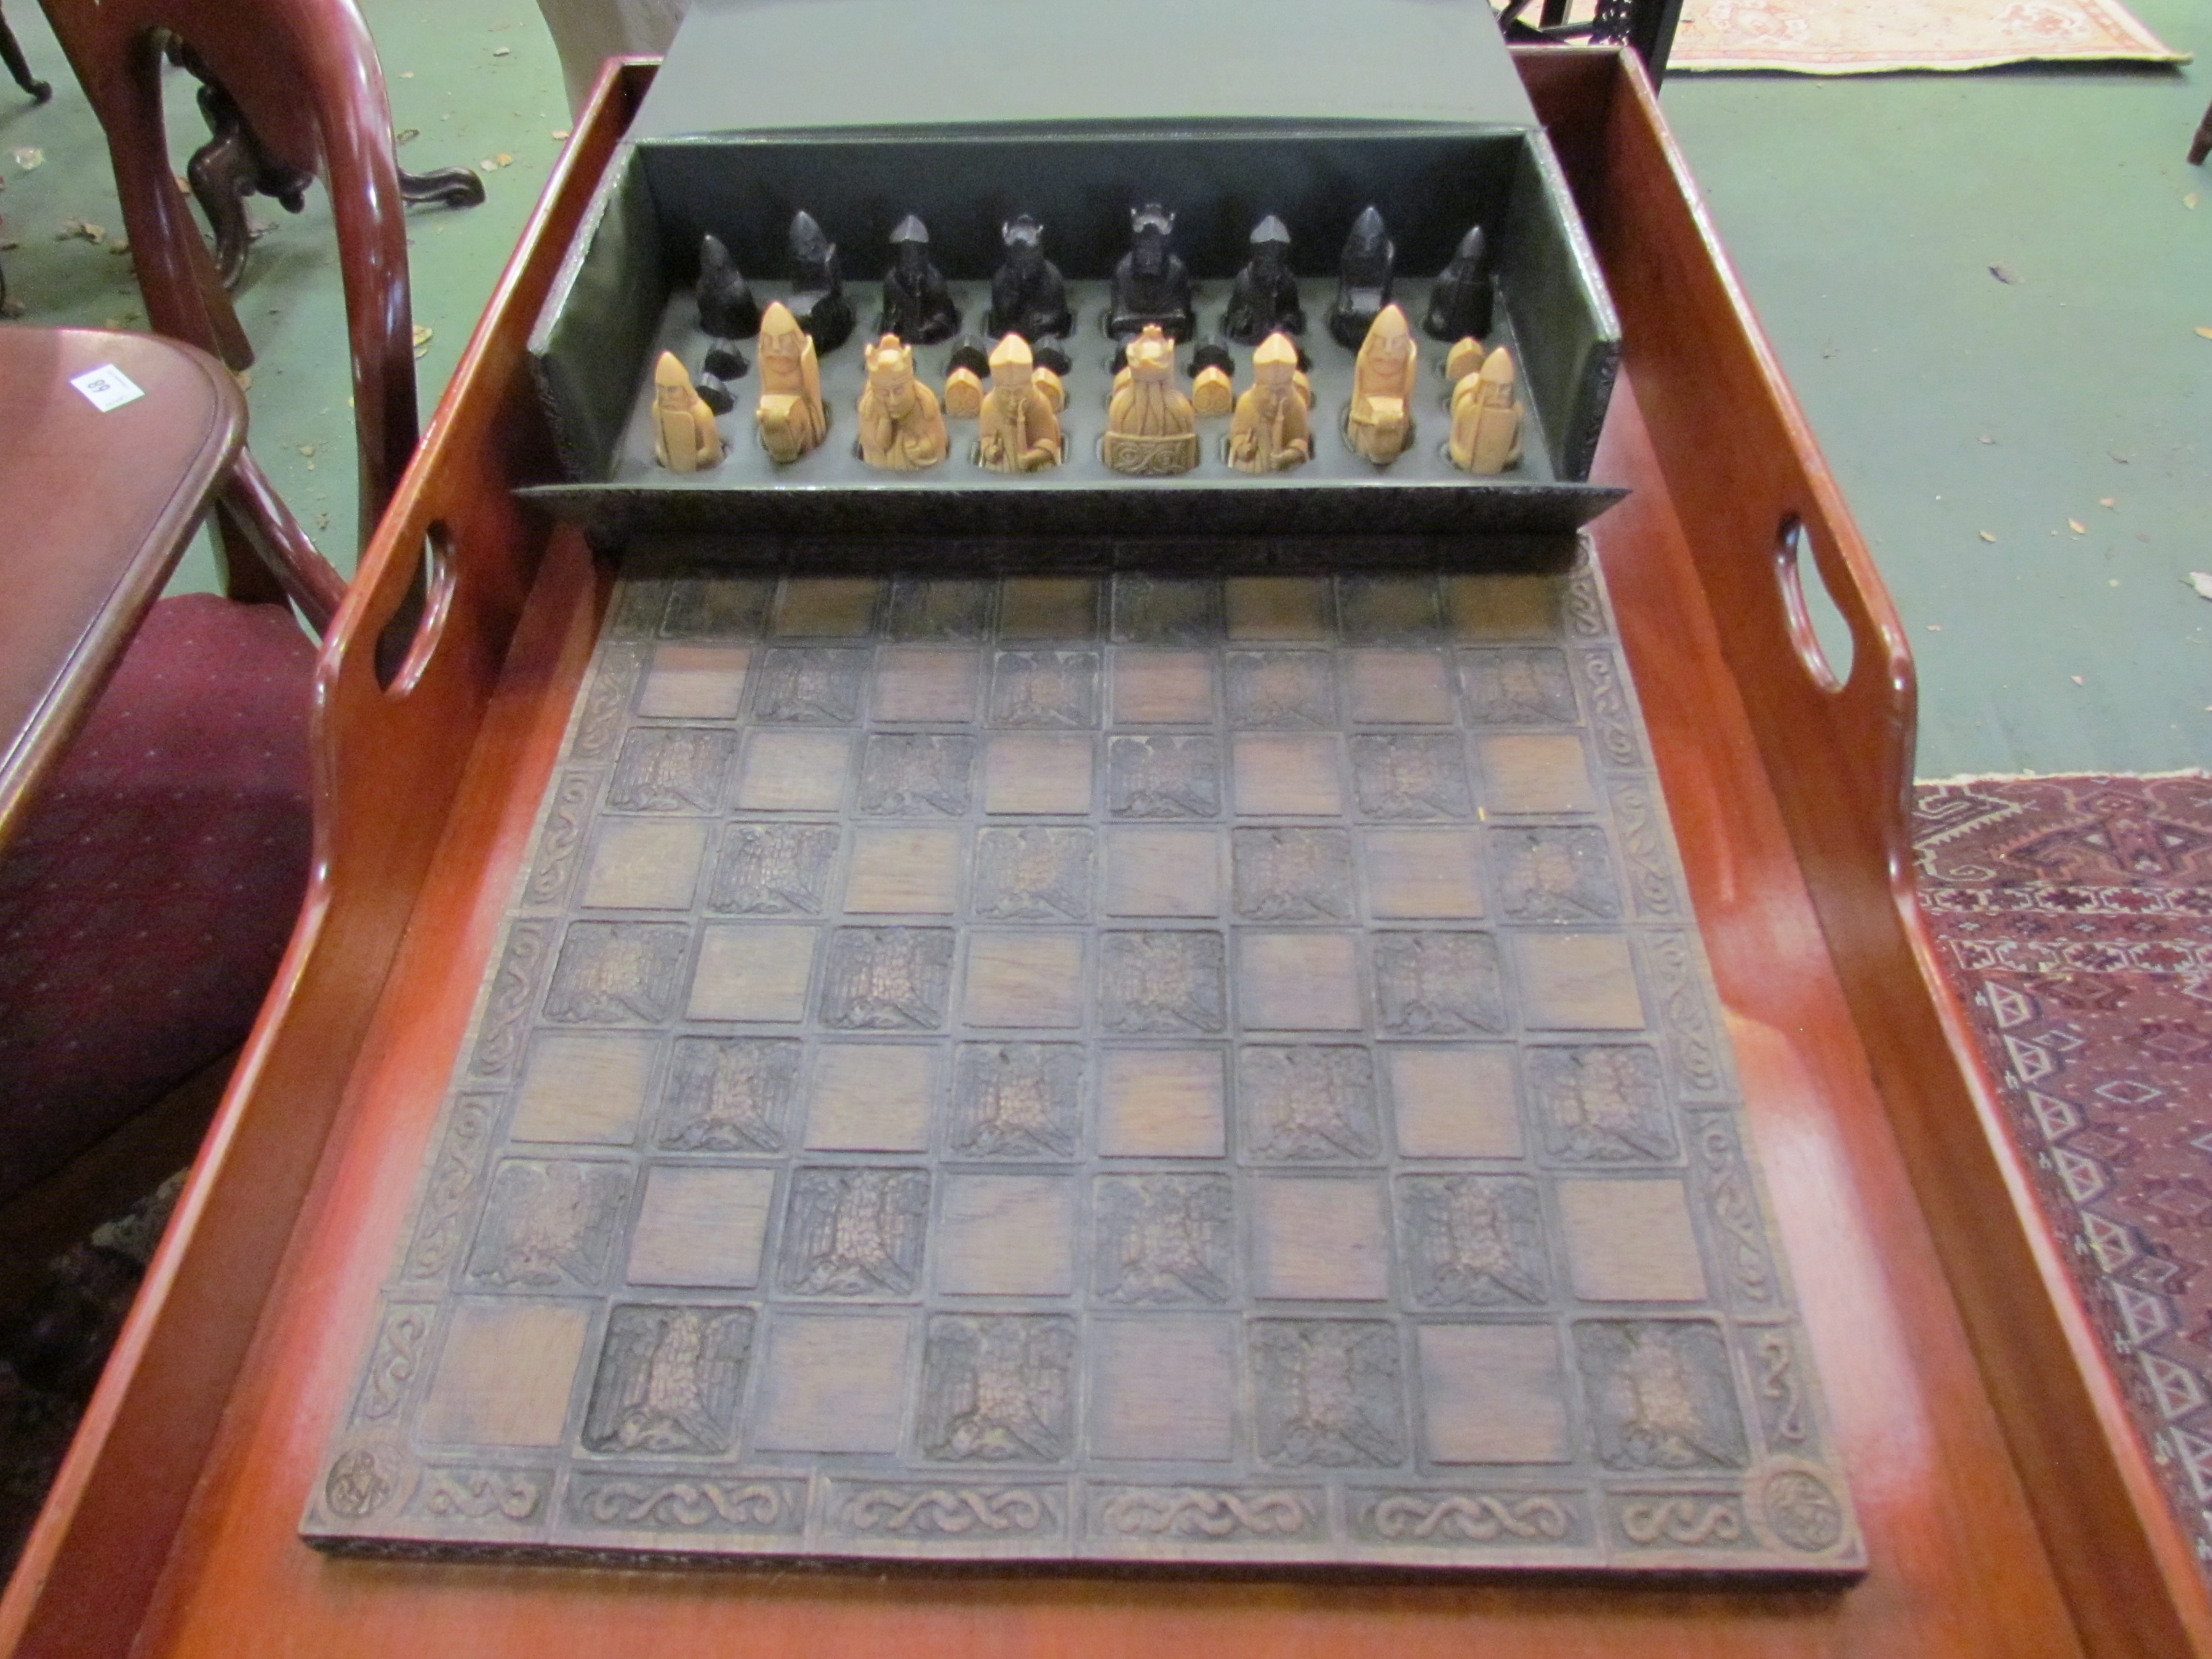 A resin copy of the Lewis chess set,